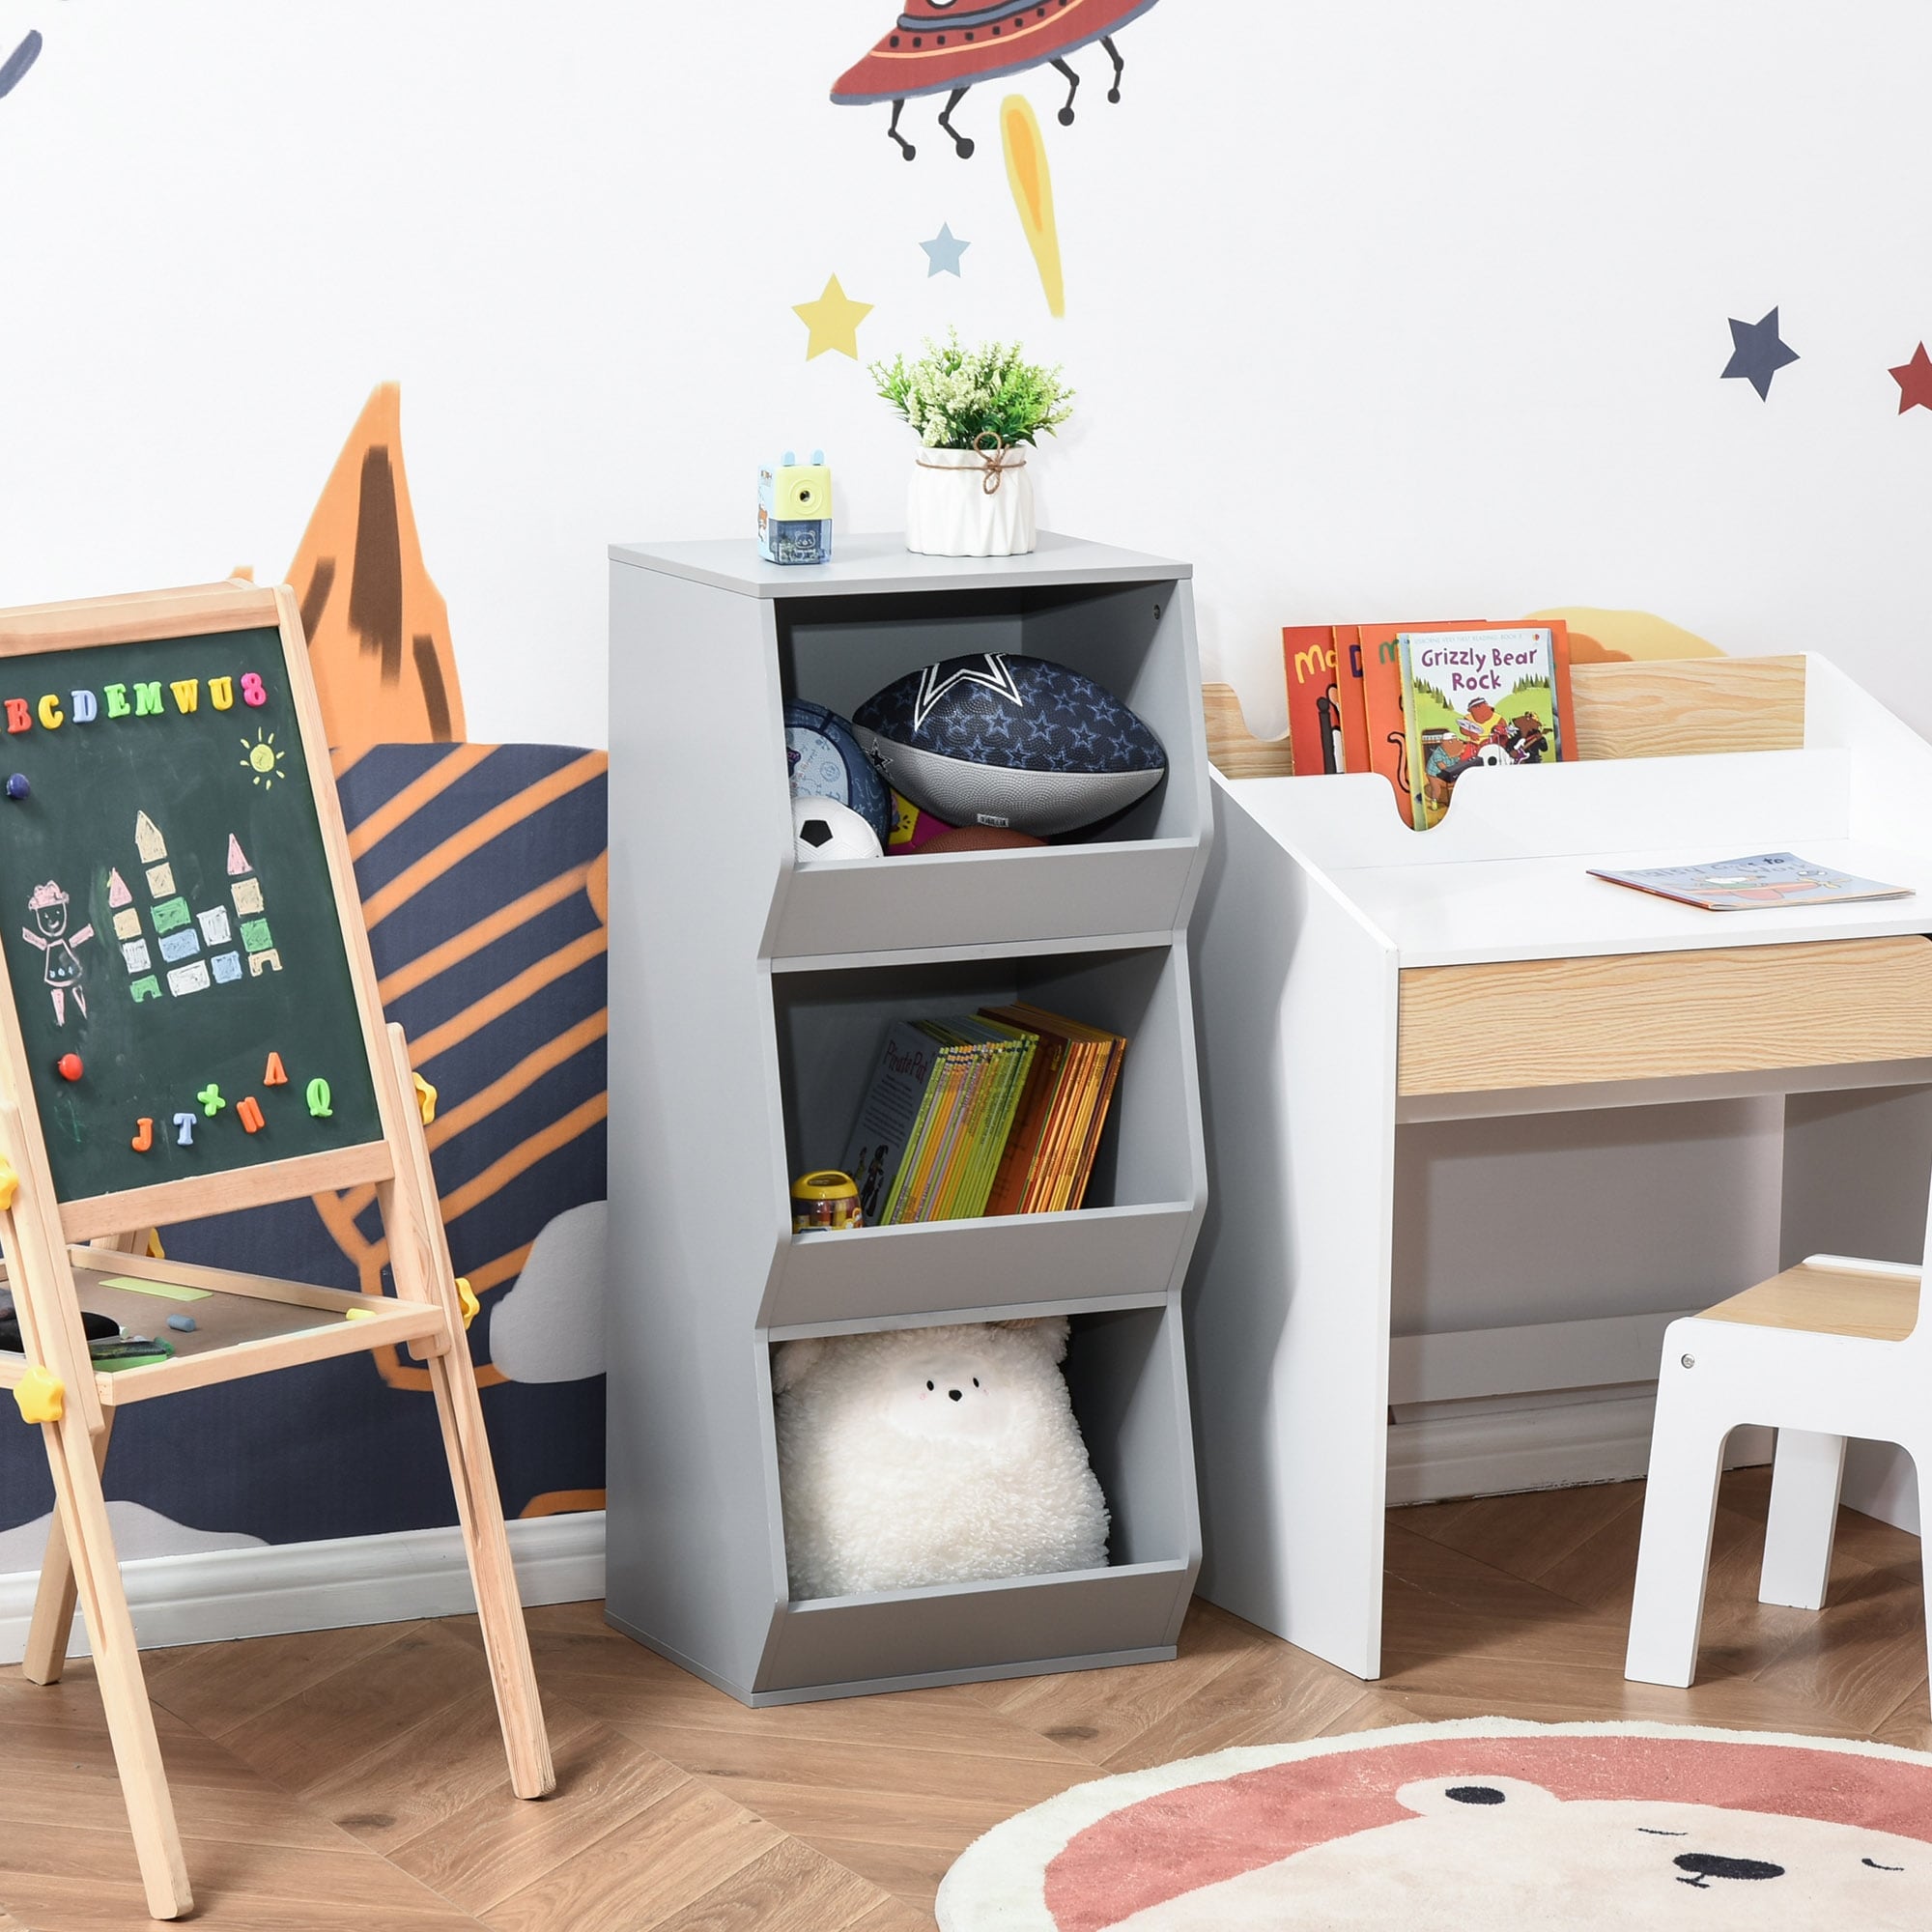 https://ak1.ostkcdn.com/images/products/is/images/direct/6f128e904fd0a6bf60e307b98bfb1d6a489a30b5/HOMCOM-Kids-Storage-Cabinet-3-Shelves-Anti-toppling-Toy-Storage-Organizer-Children-Bookcase-Book-Rack%2C-Grey.jpg